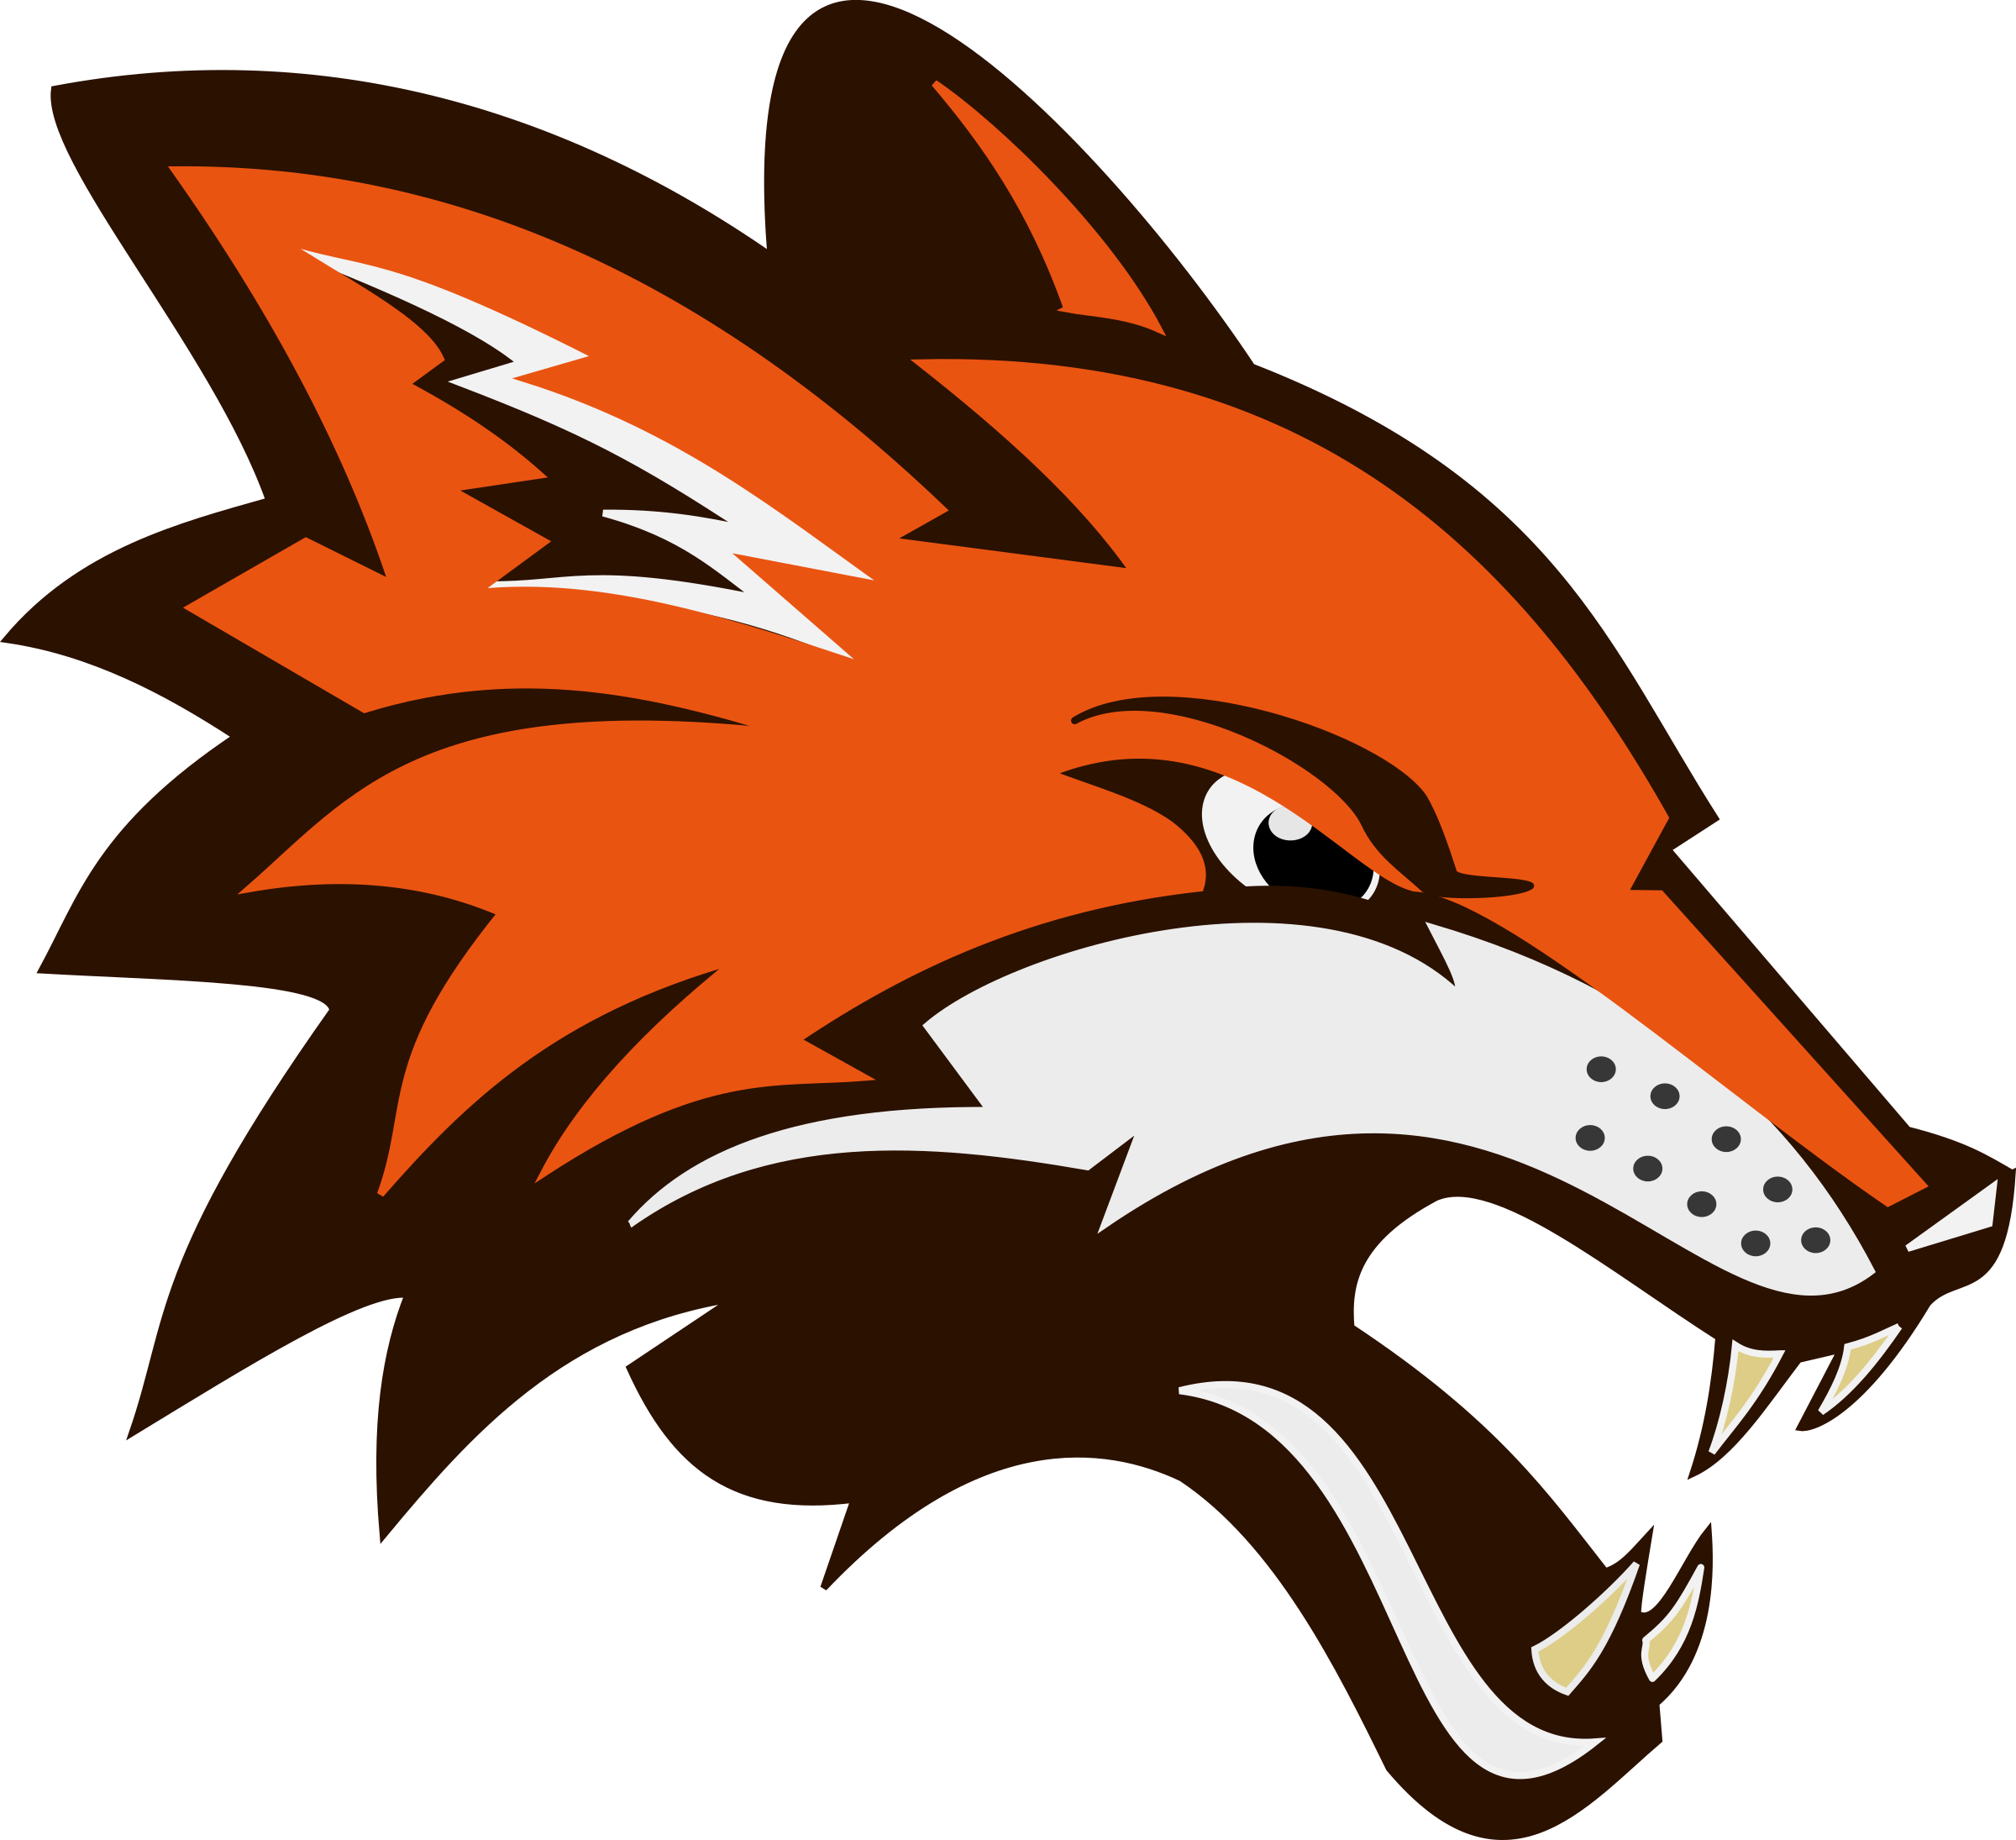 Angry fighting fox remix. Fight clipart school fight